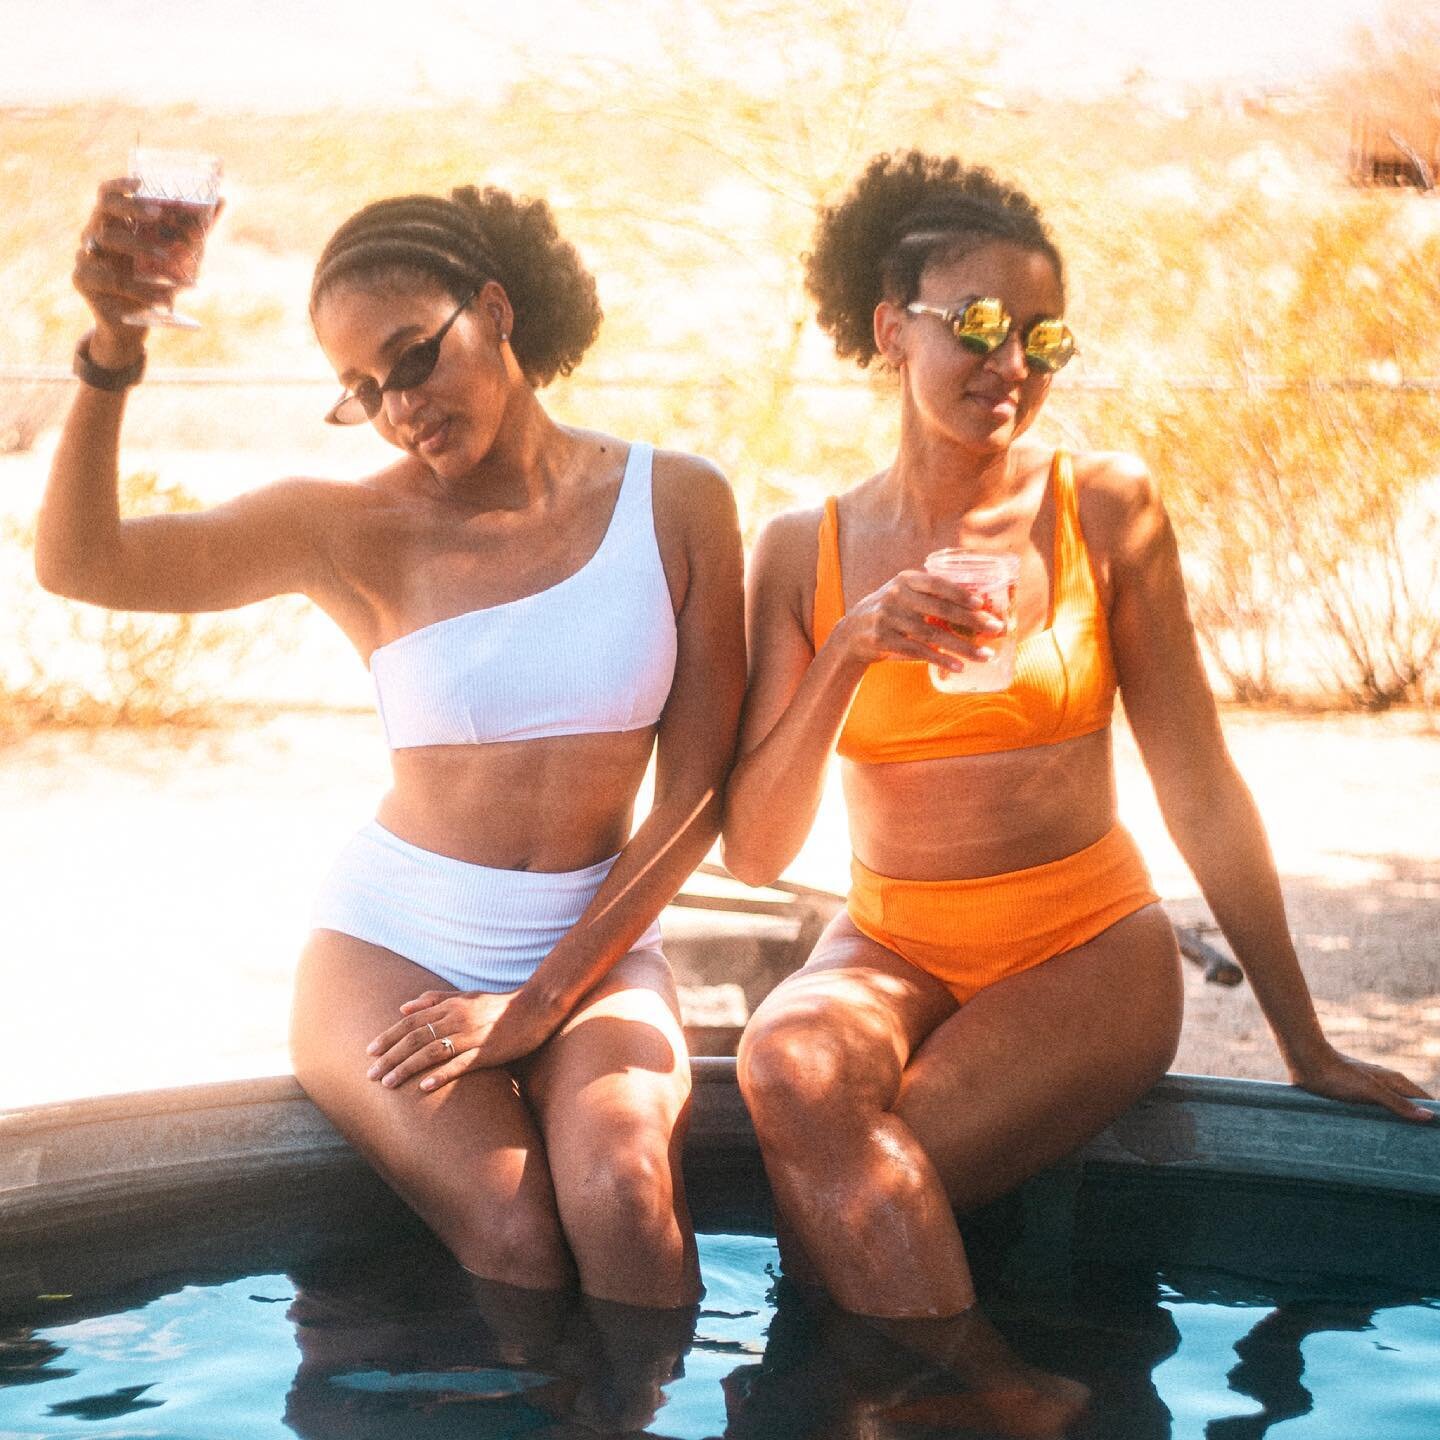 🥂Cheers to the weekend and some fun in the sun 🥂

Can you believe it&rsquo;s midsummer ☀️? Looking for a fun, classic, comfy bikini? Thank you @andieswim for these cute bikinis that are perfect for all body types 👙. @andieswim featured the Black S